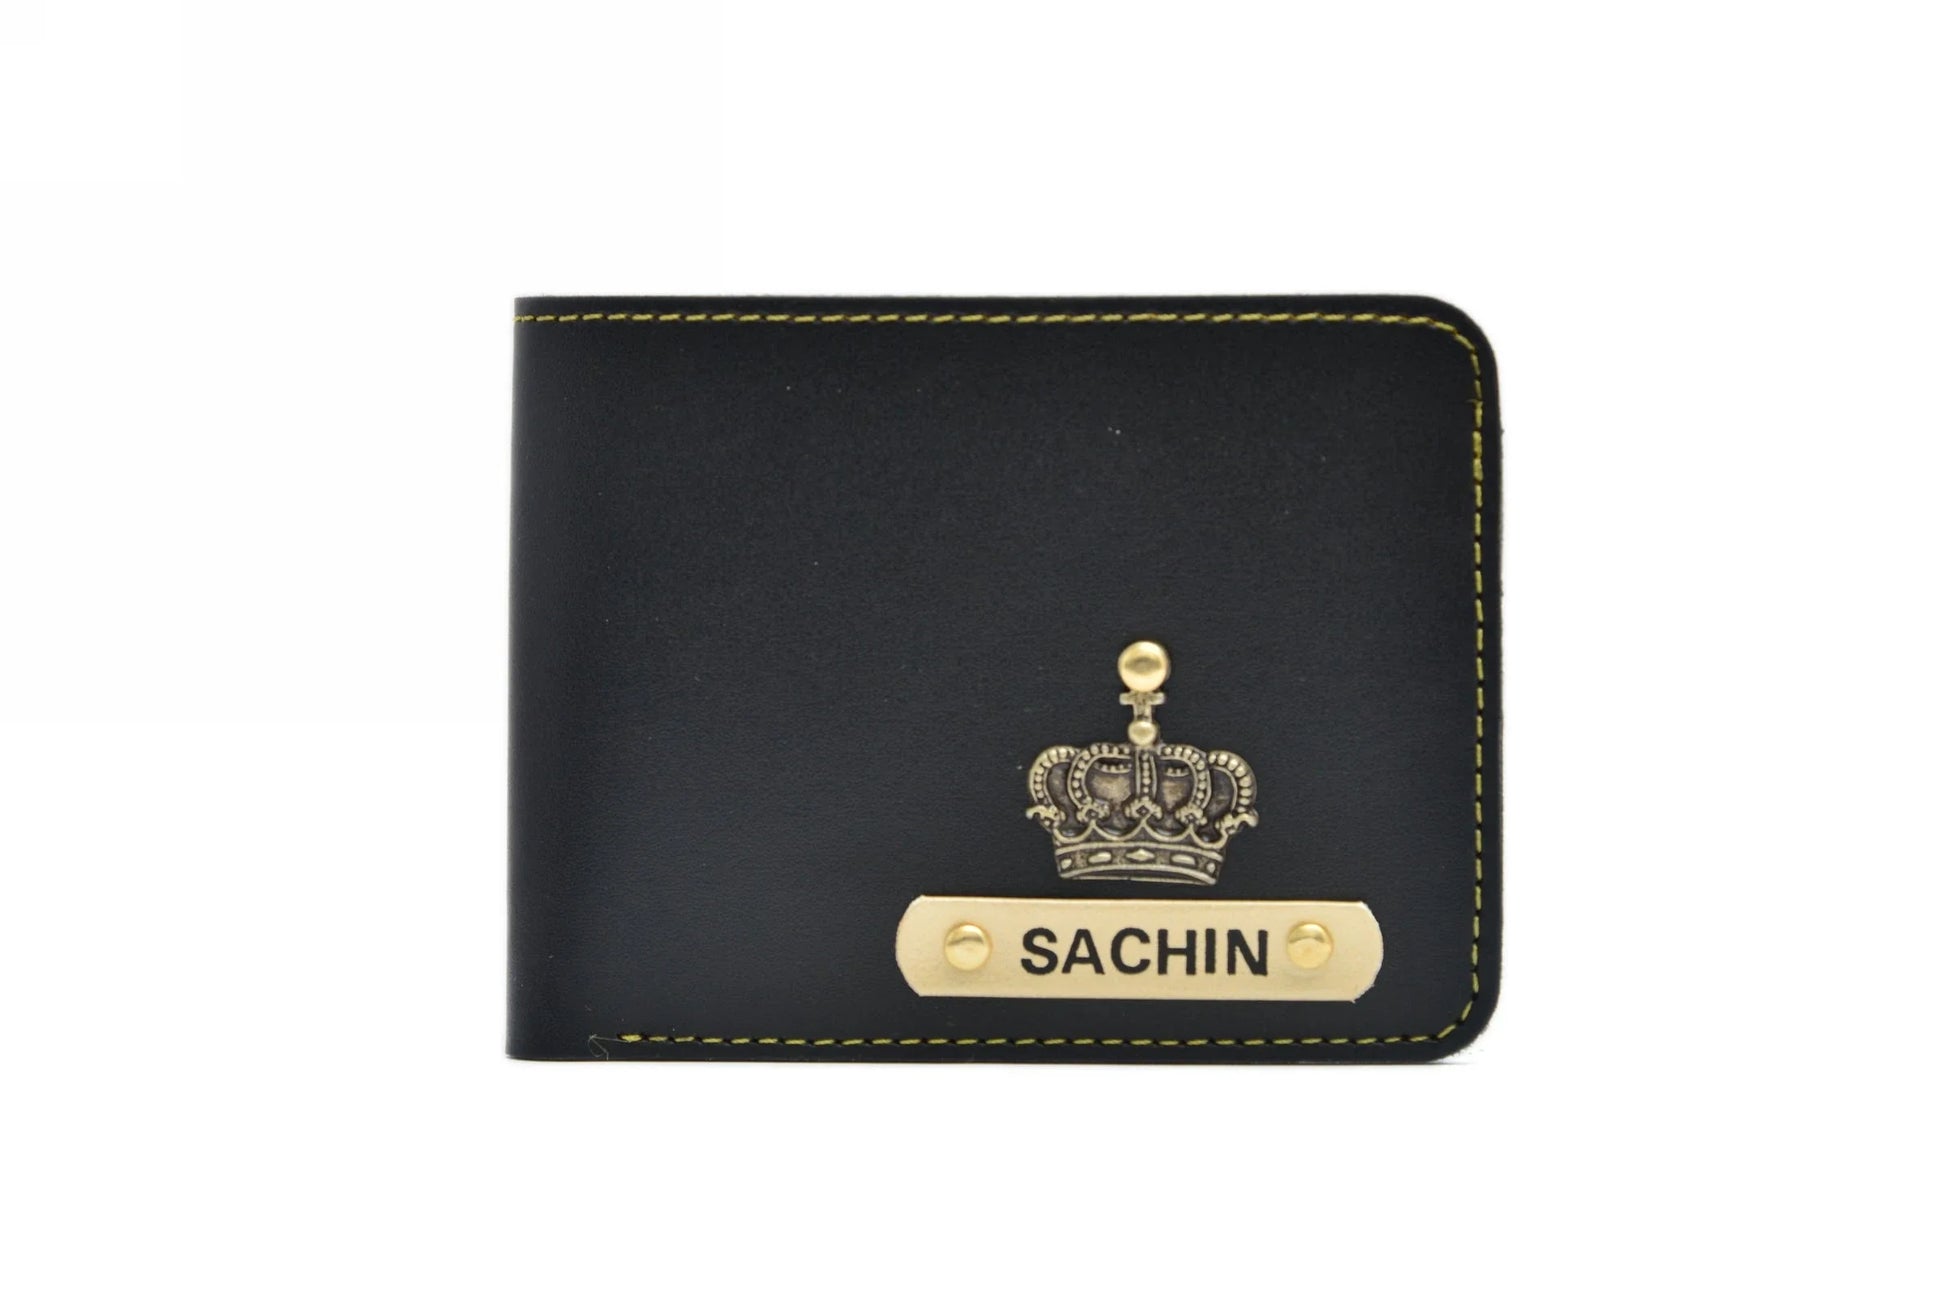 personalized-mens-wallet-black-customized-best-gift-for-boyfriend-girlfriend. Personalized Men's Wallet - Black.Classy wallet made with the top-notch quality vegan leather is the perfect touch to any office/formal attire.The best part is that faux, synthetic leather is very durable. Go classy with this fashionable and trending wallet.